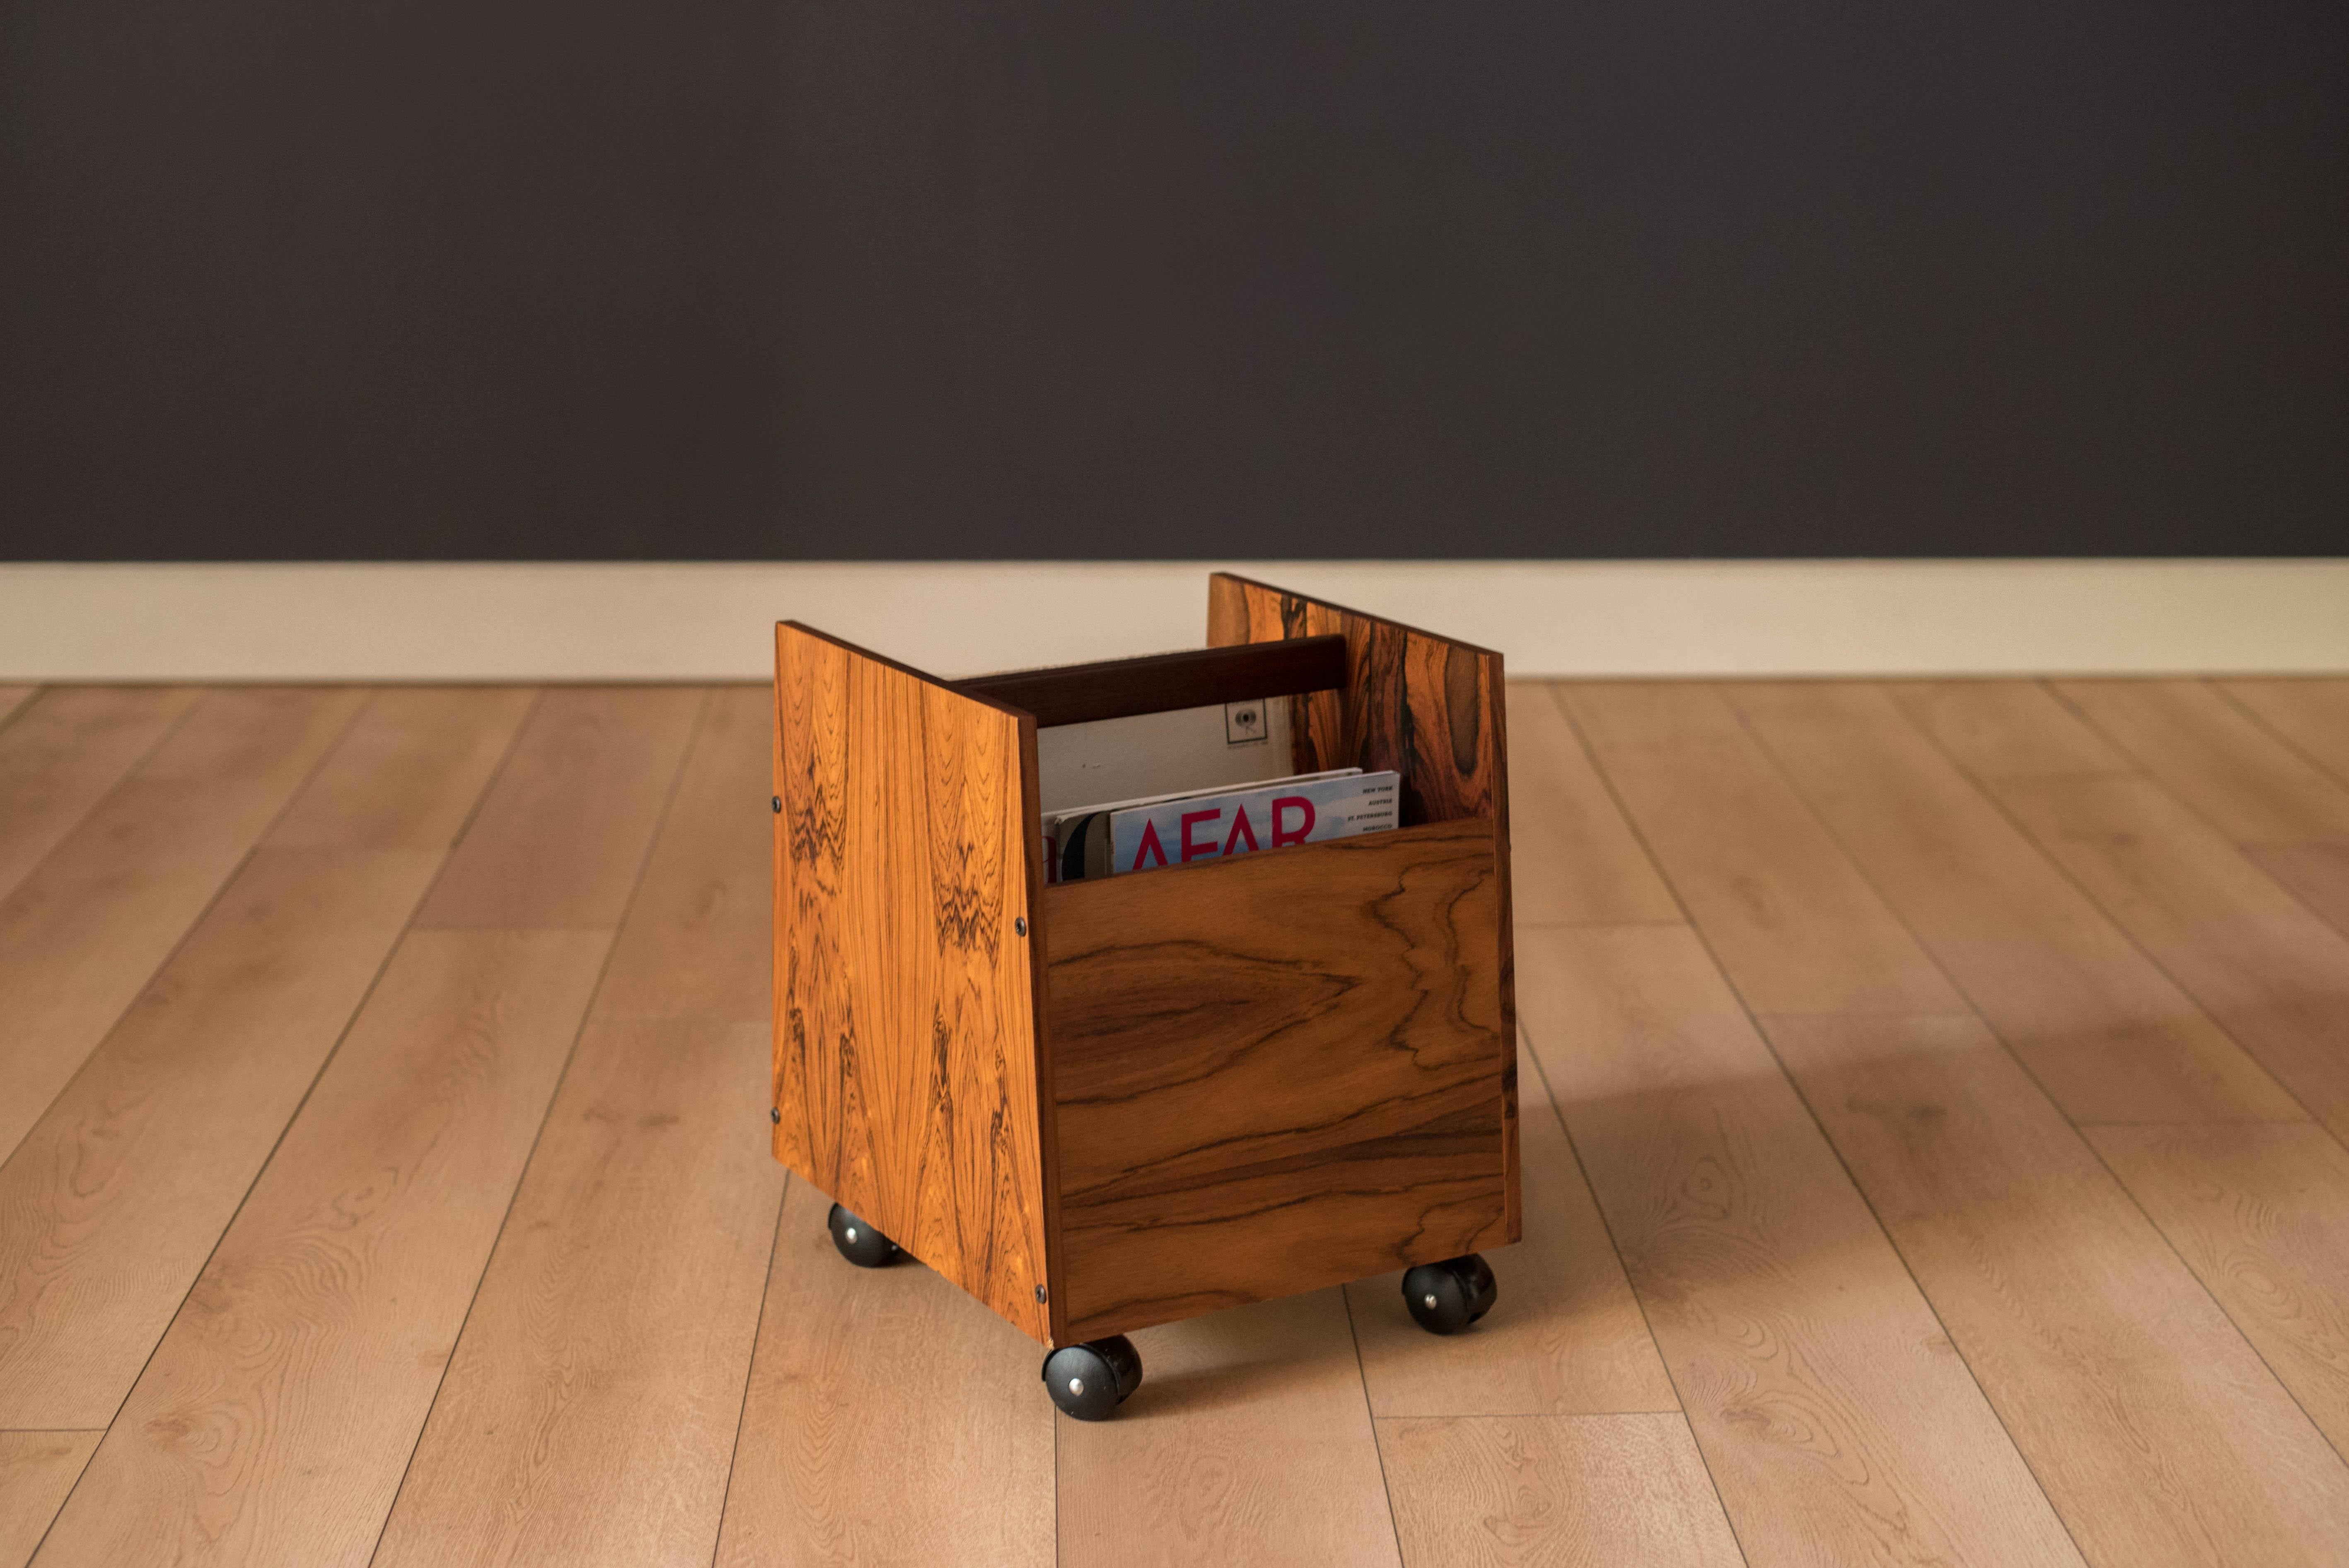 Mid-Century Modern magazine LP vinyl record storage cart designed by Rolf Hesland for Bruksbo, Norway. This piece features stunning Brazilian rosewood grains that showcase from any angle. Equipped with two removable dividers and four casters that